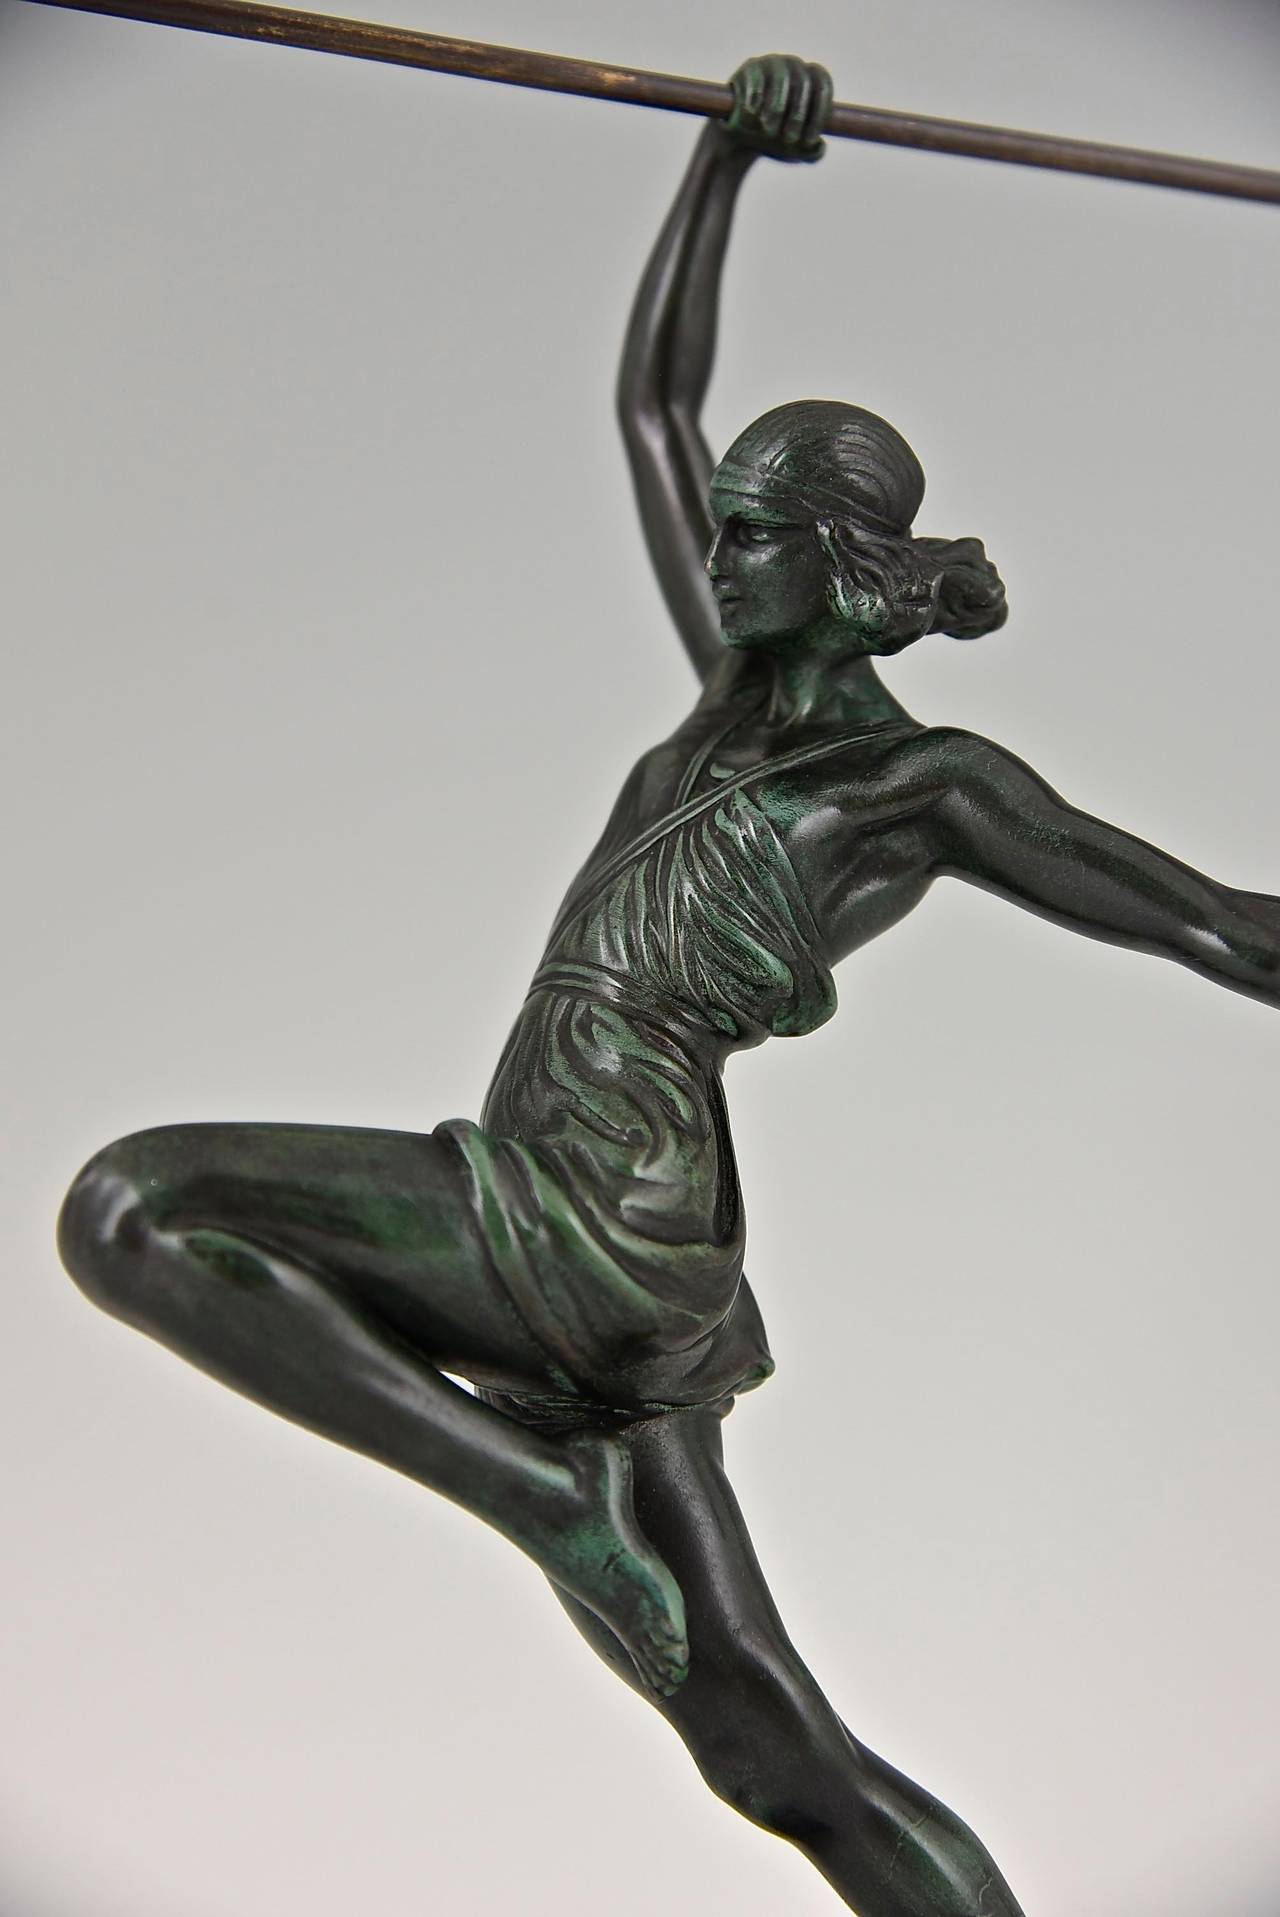 Metal French Art Deco Sculpture by Fayral, Female Javelin Thrower, 1935